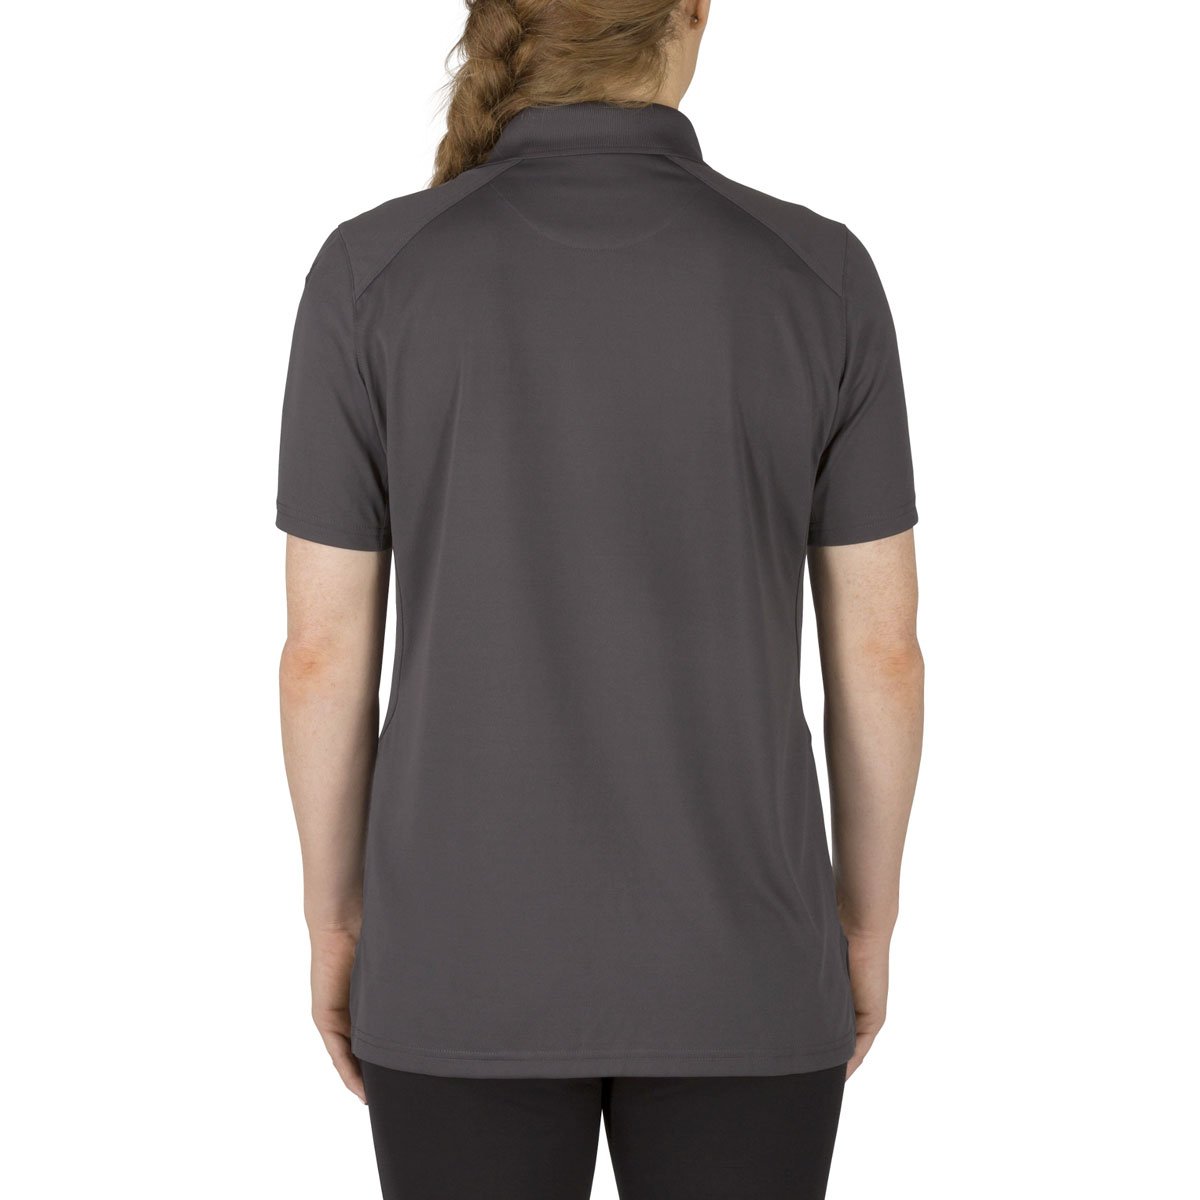 5.11 Tactical Womens Helios Short Sleeve Polo Shirts 5.11 Tactical Charcoal Small Tactical Gear Supplier Tactical Distributors Australia